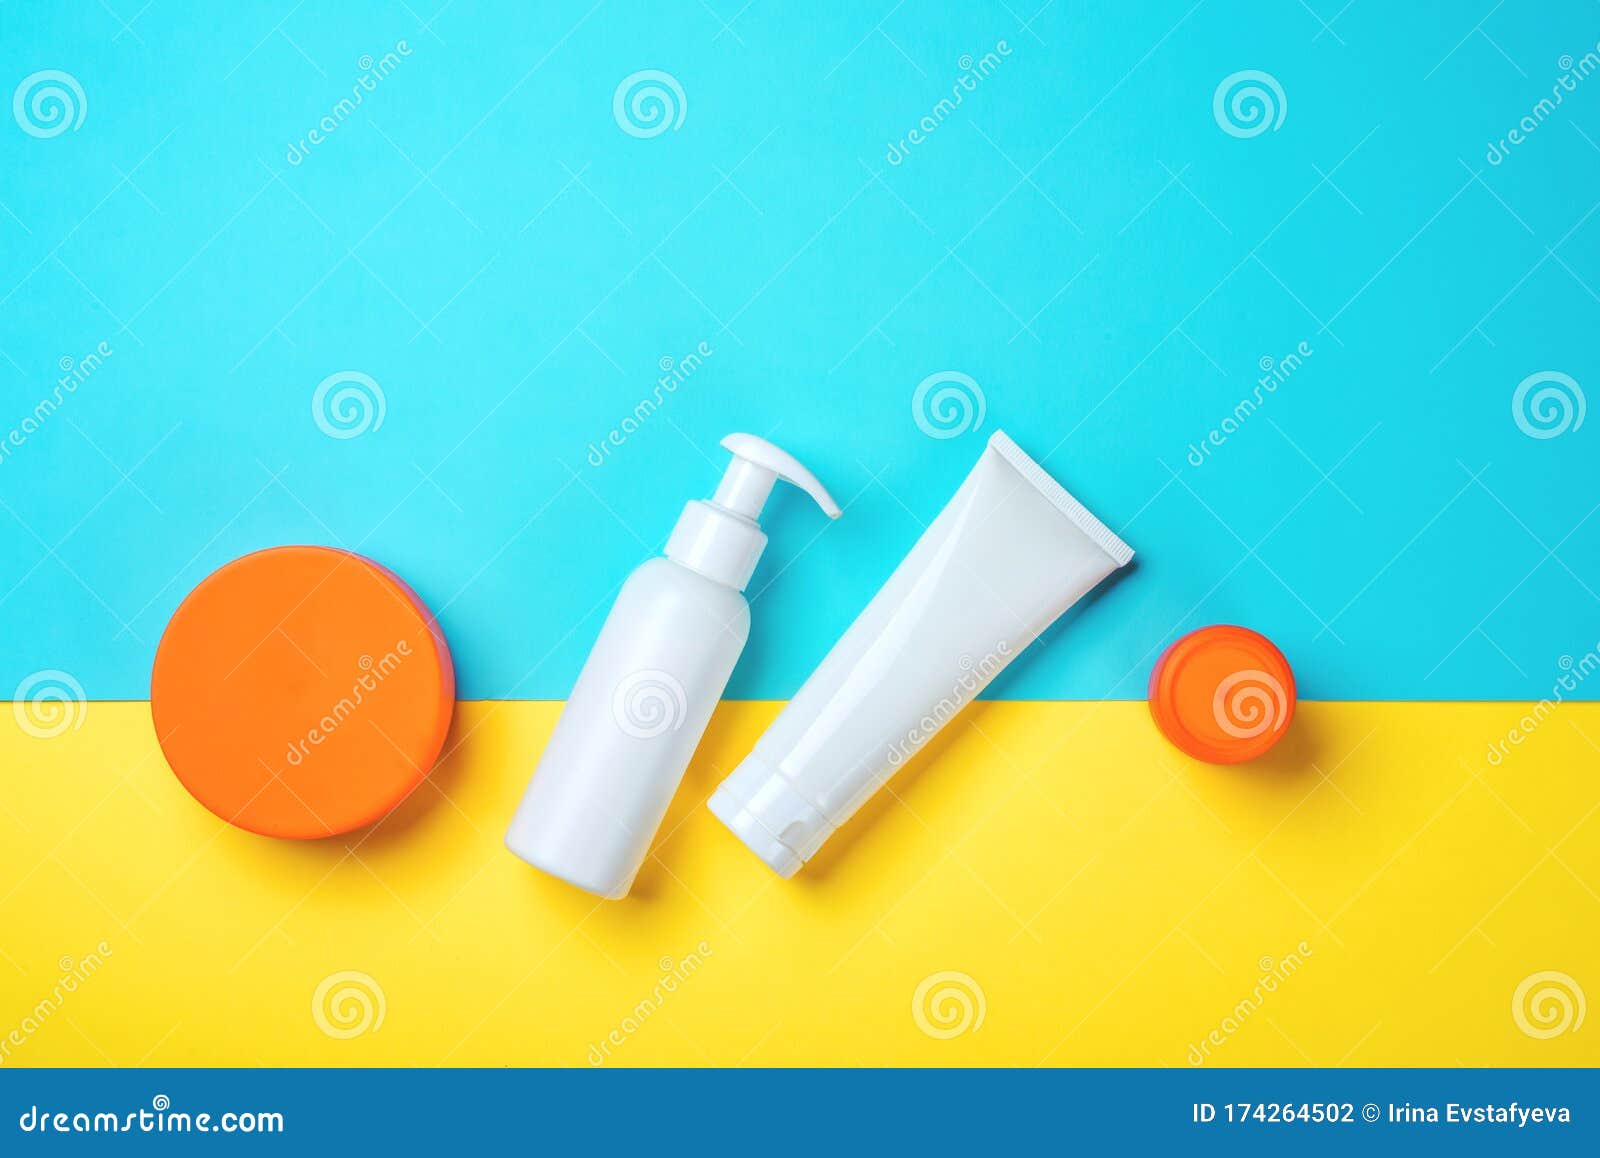 sunprotection objects, suscreen. flat lay, natural cosmetics, cream spf for face and body. summer travel concept